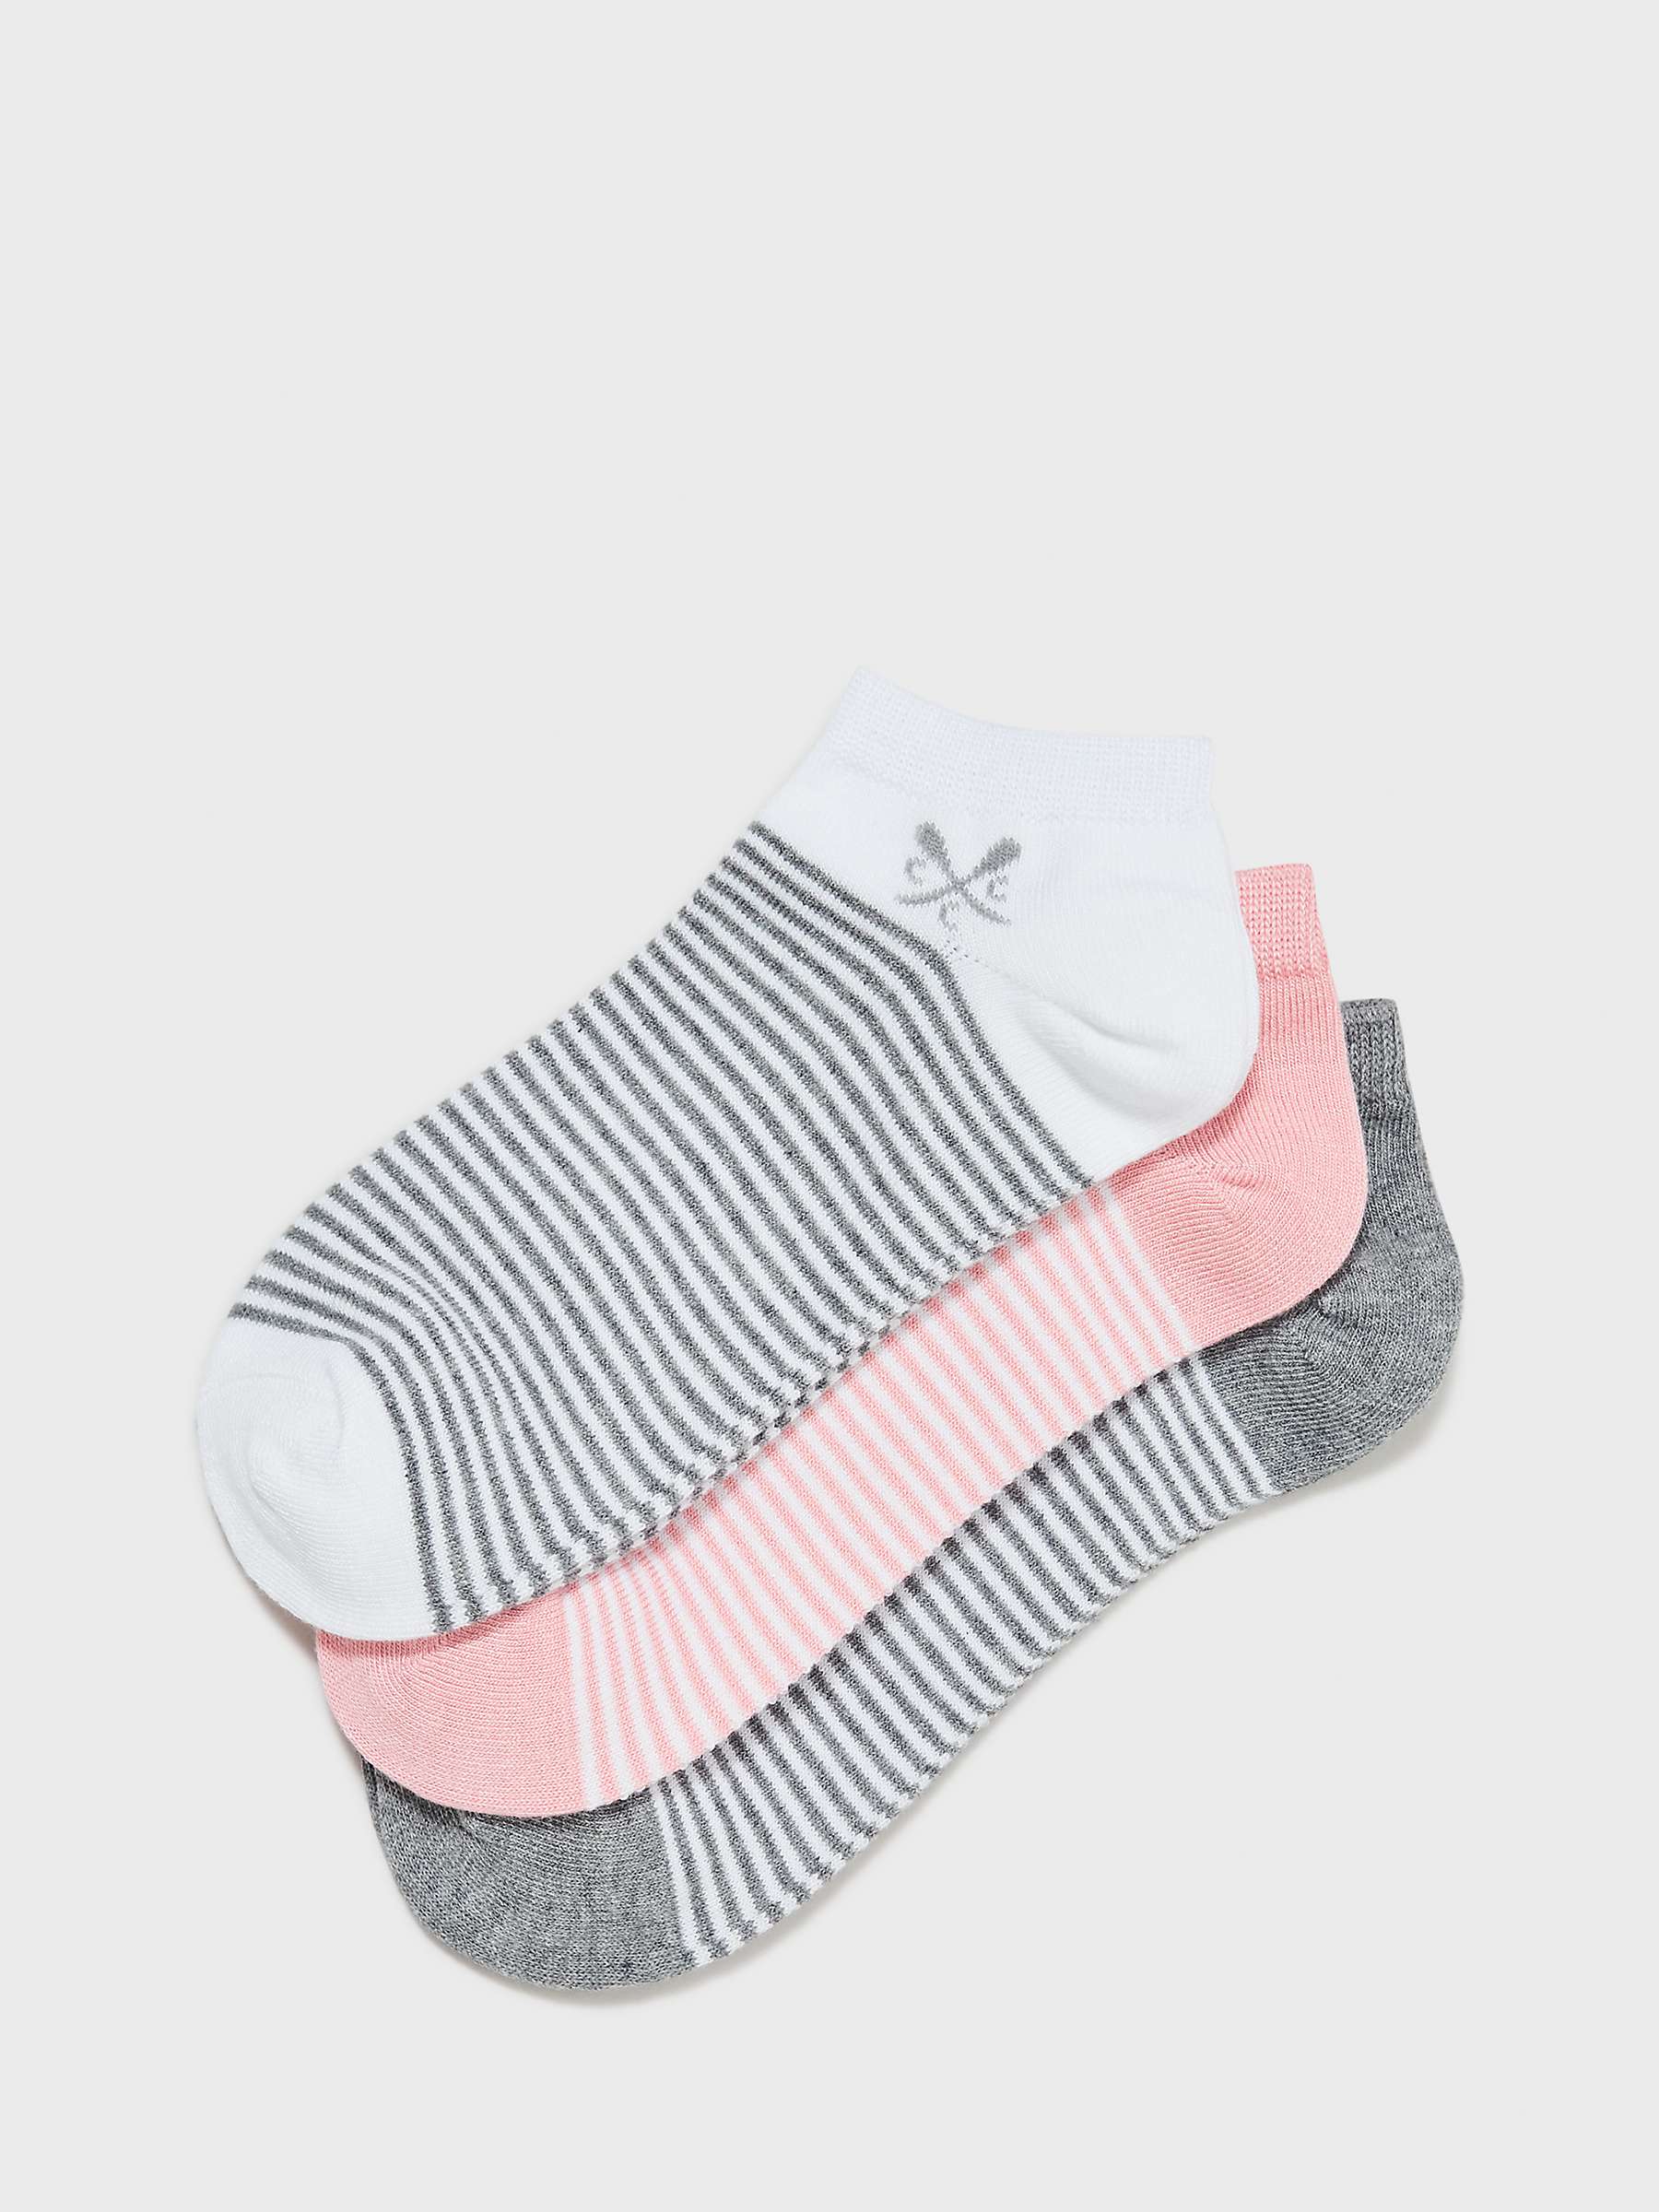 Buy Crew Clothing Striped Bamboo Trainer Socks, Pack of 3, Oatmeal/Pink/Grey Online at johnlewis.com